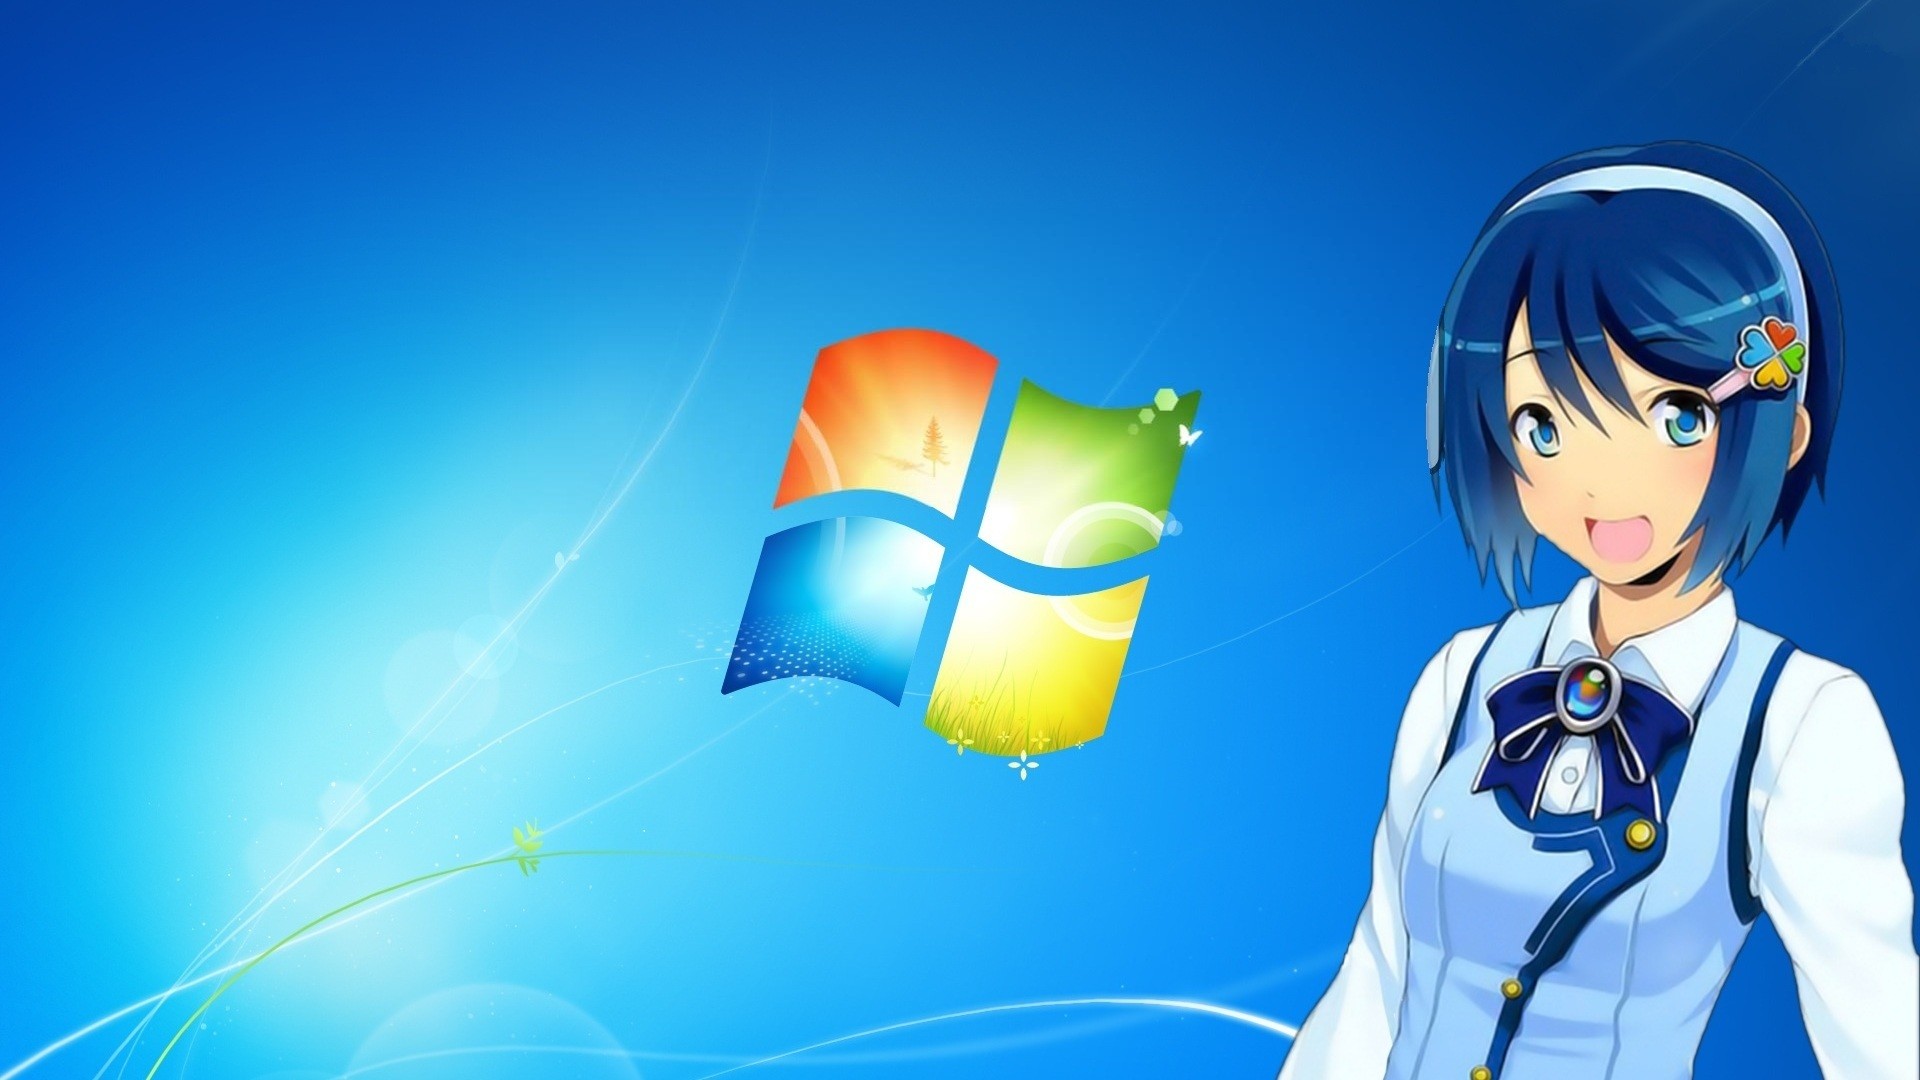 1920x1080 ... Anime Wallpapers For PC Collection ...